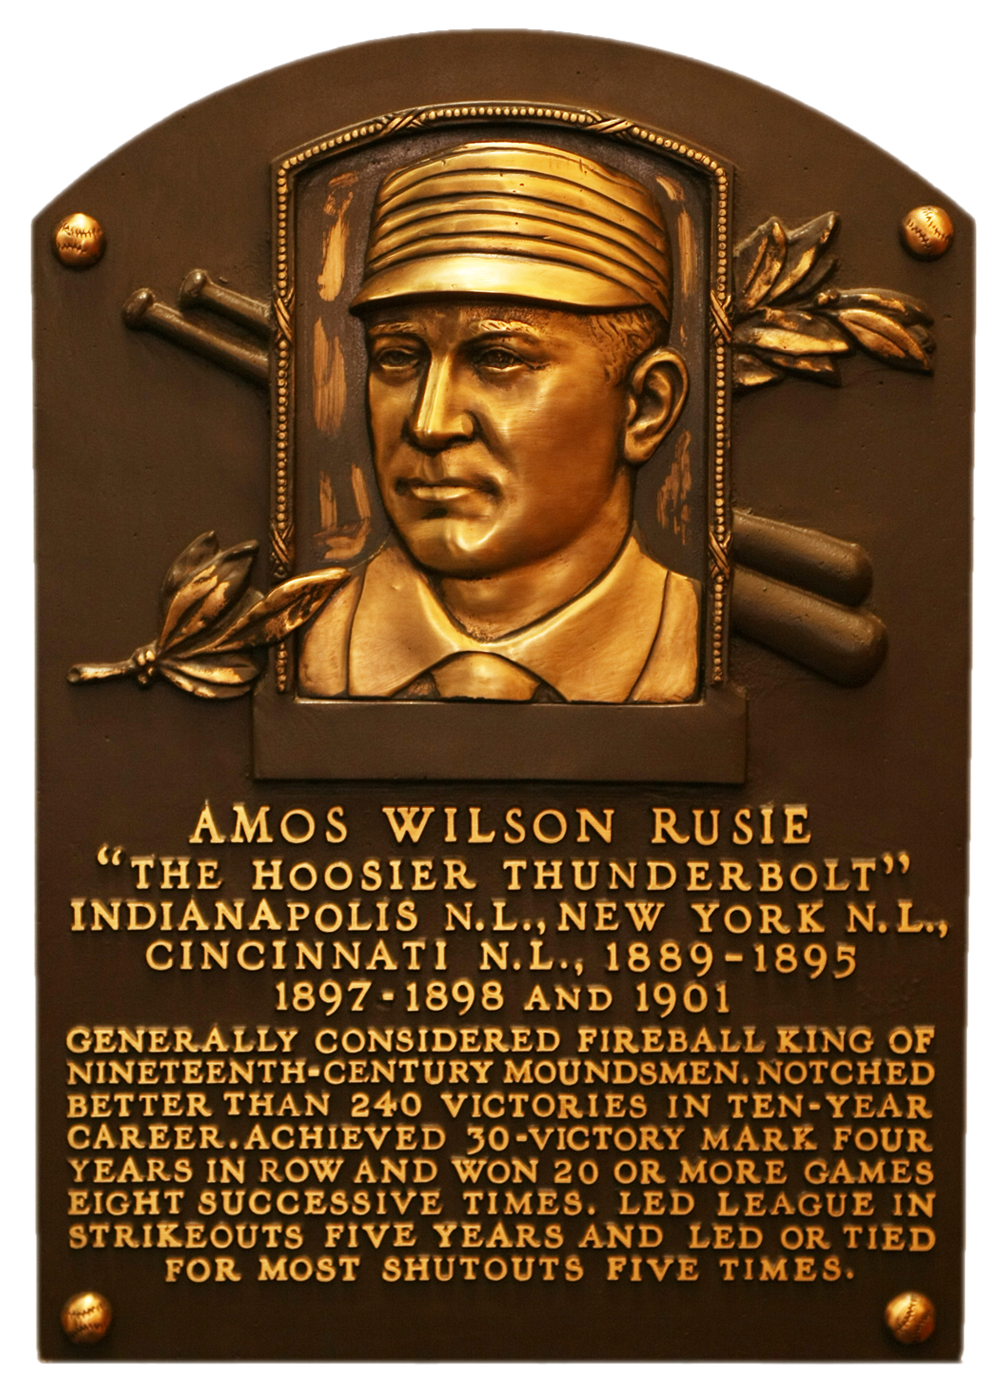 Amos Rusie Hall of Fame plaque